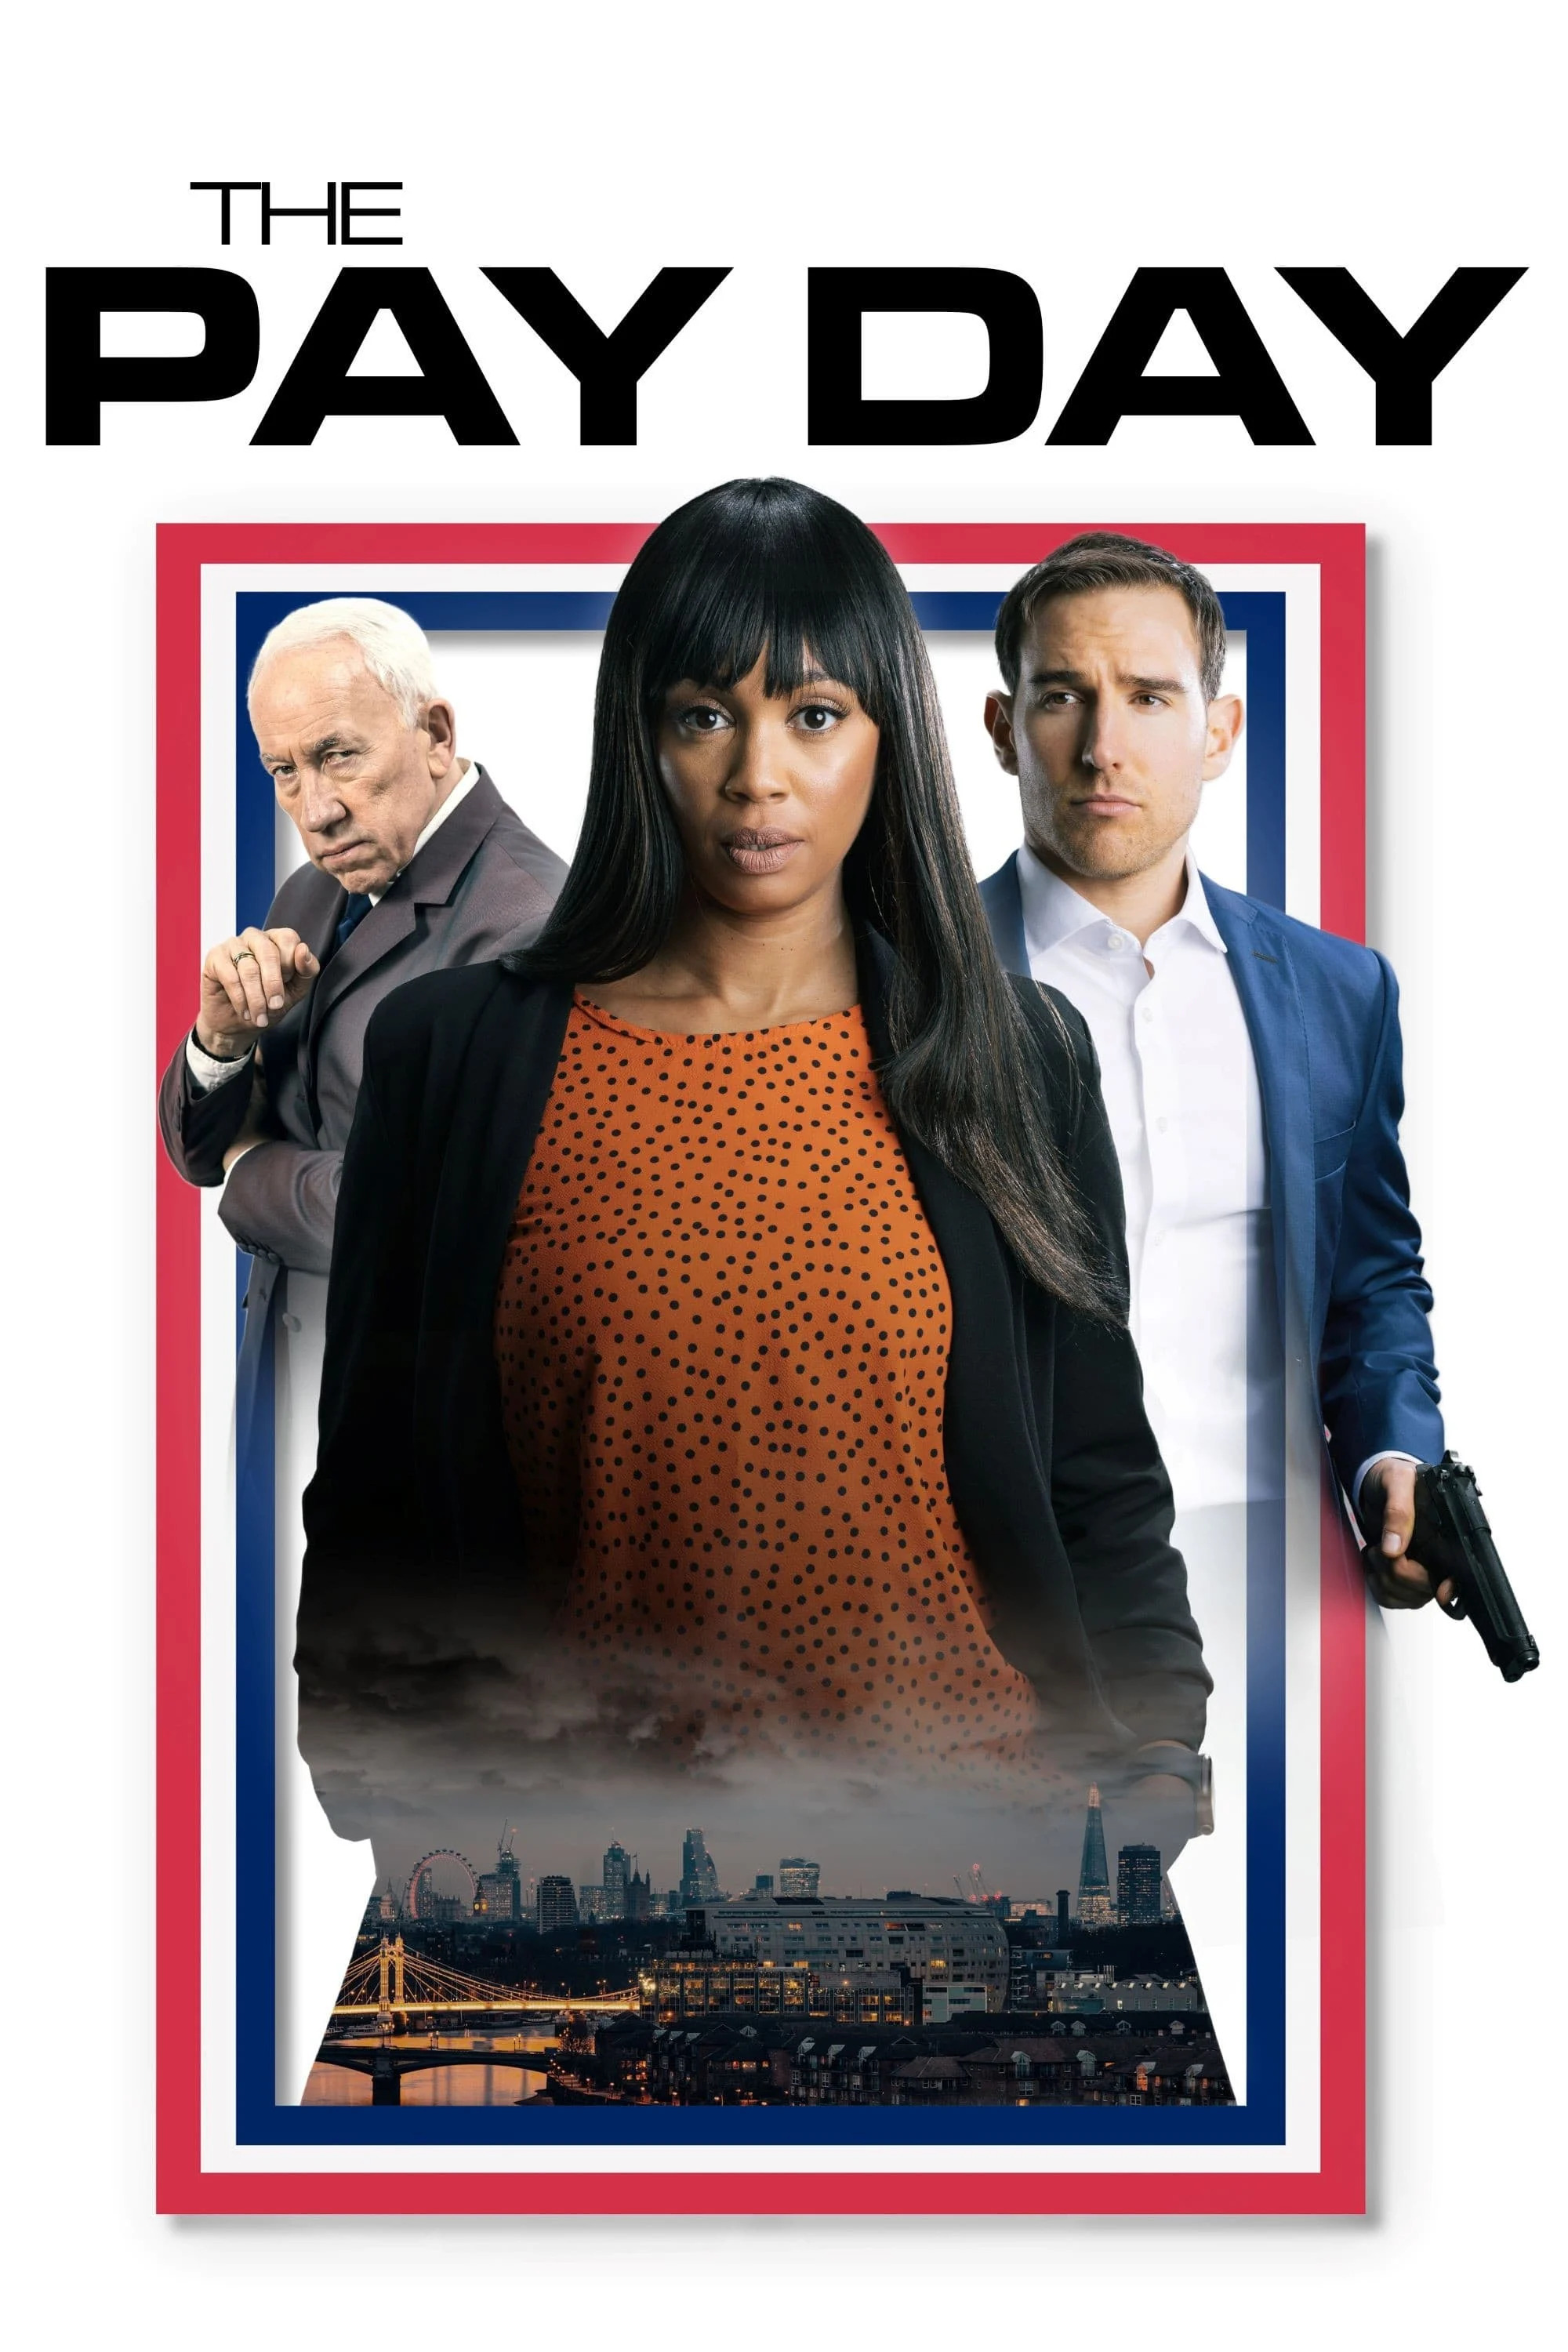 Payday trailer and poster